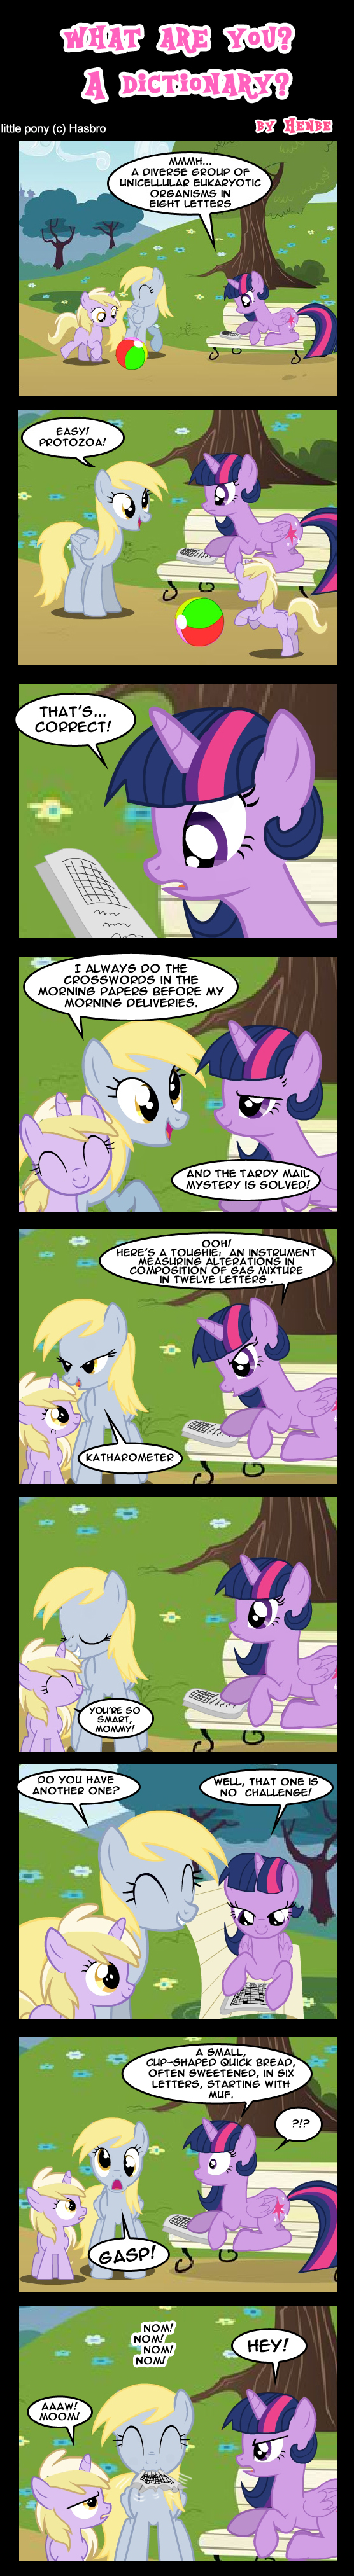 ball bench blonde_hair cloud clouds comic cub cutie_mark derpy_hooves_(mlp) dialog dinky_hooves_(mlp) eating eatting english_text equine eyes_closed female feral friendship_is_magic frown fur grey_fur hair henbe horn horse long_hair looking_at_viewer mammal multi-colored_hair my_little_pony newspaper om_nom_nom open_mouth outside pegasus pony purple_eyes purple_fur purple_hair sitting smile text tongue twilight_sparkle_(mlp) unicorn winged_unicorn wings yellow_eyes young